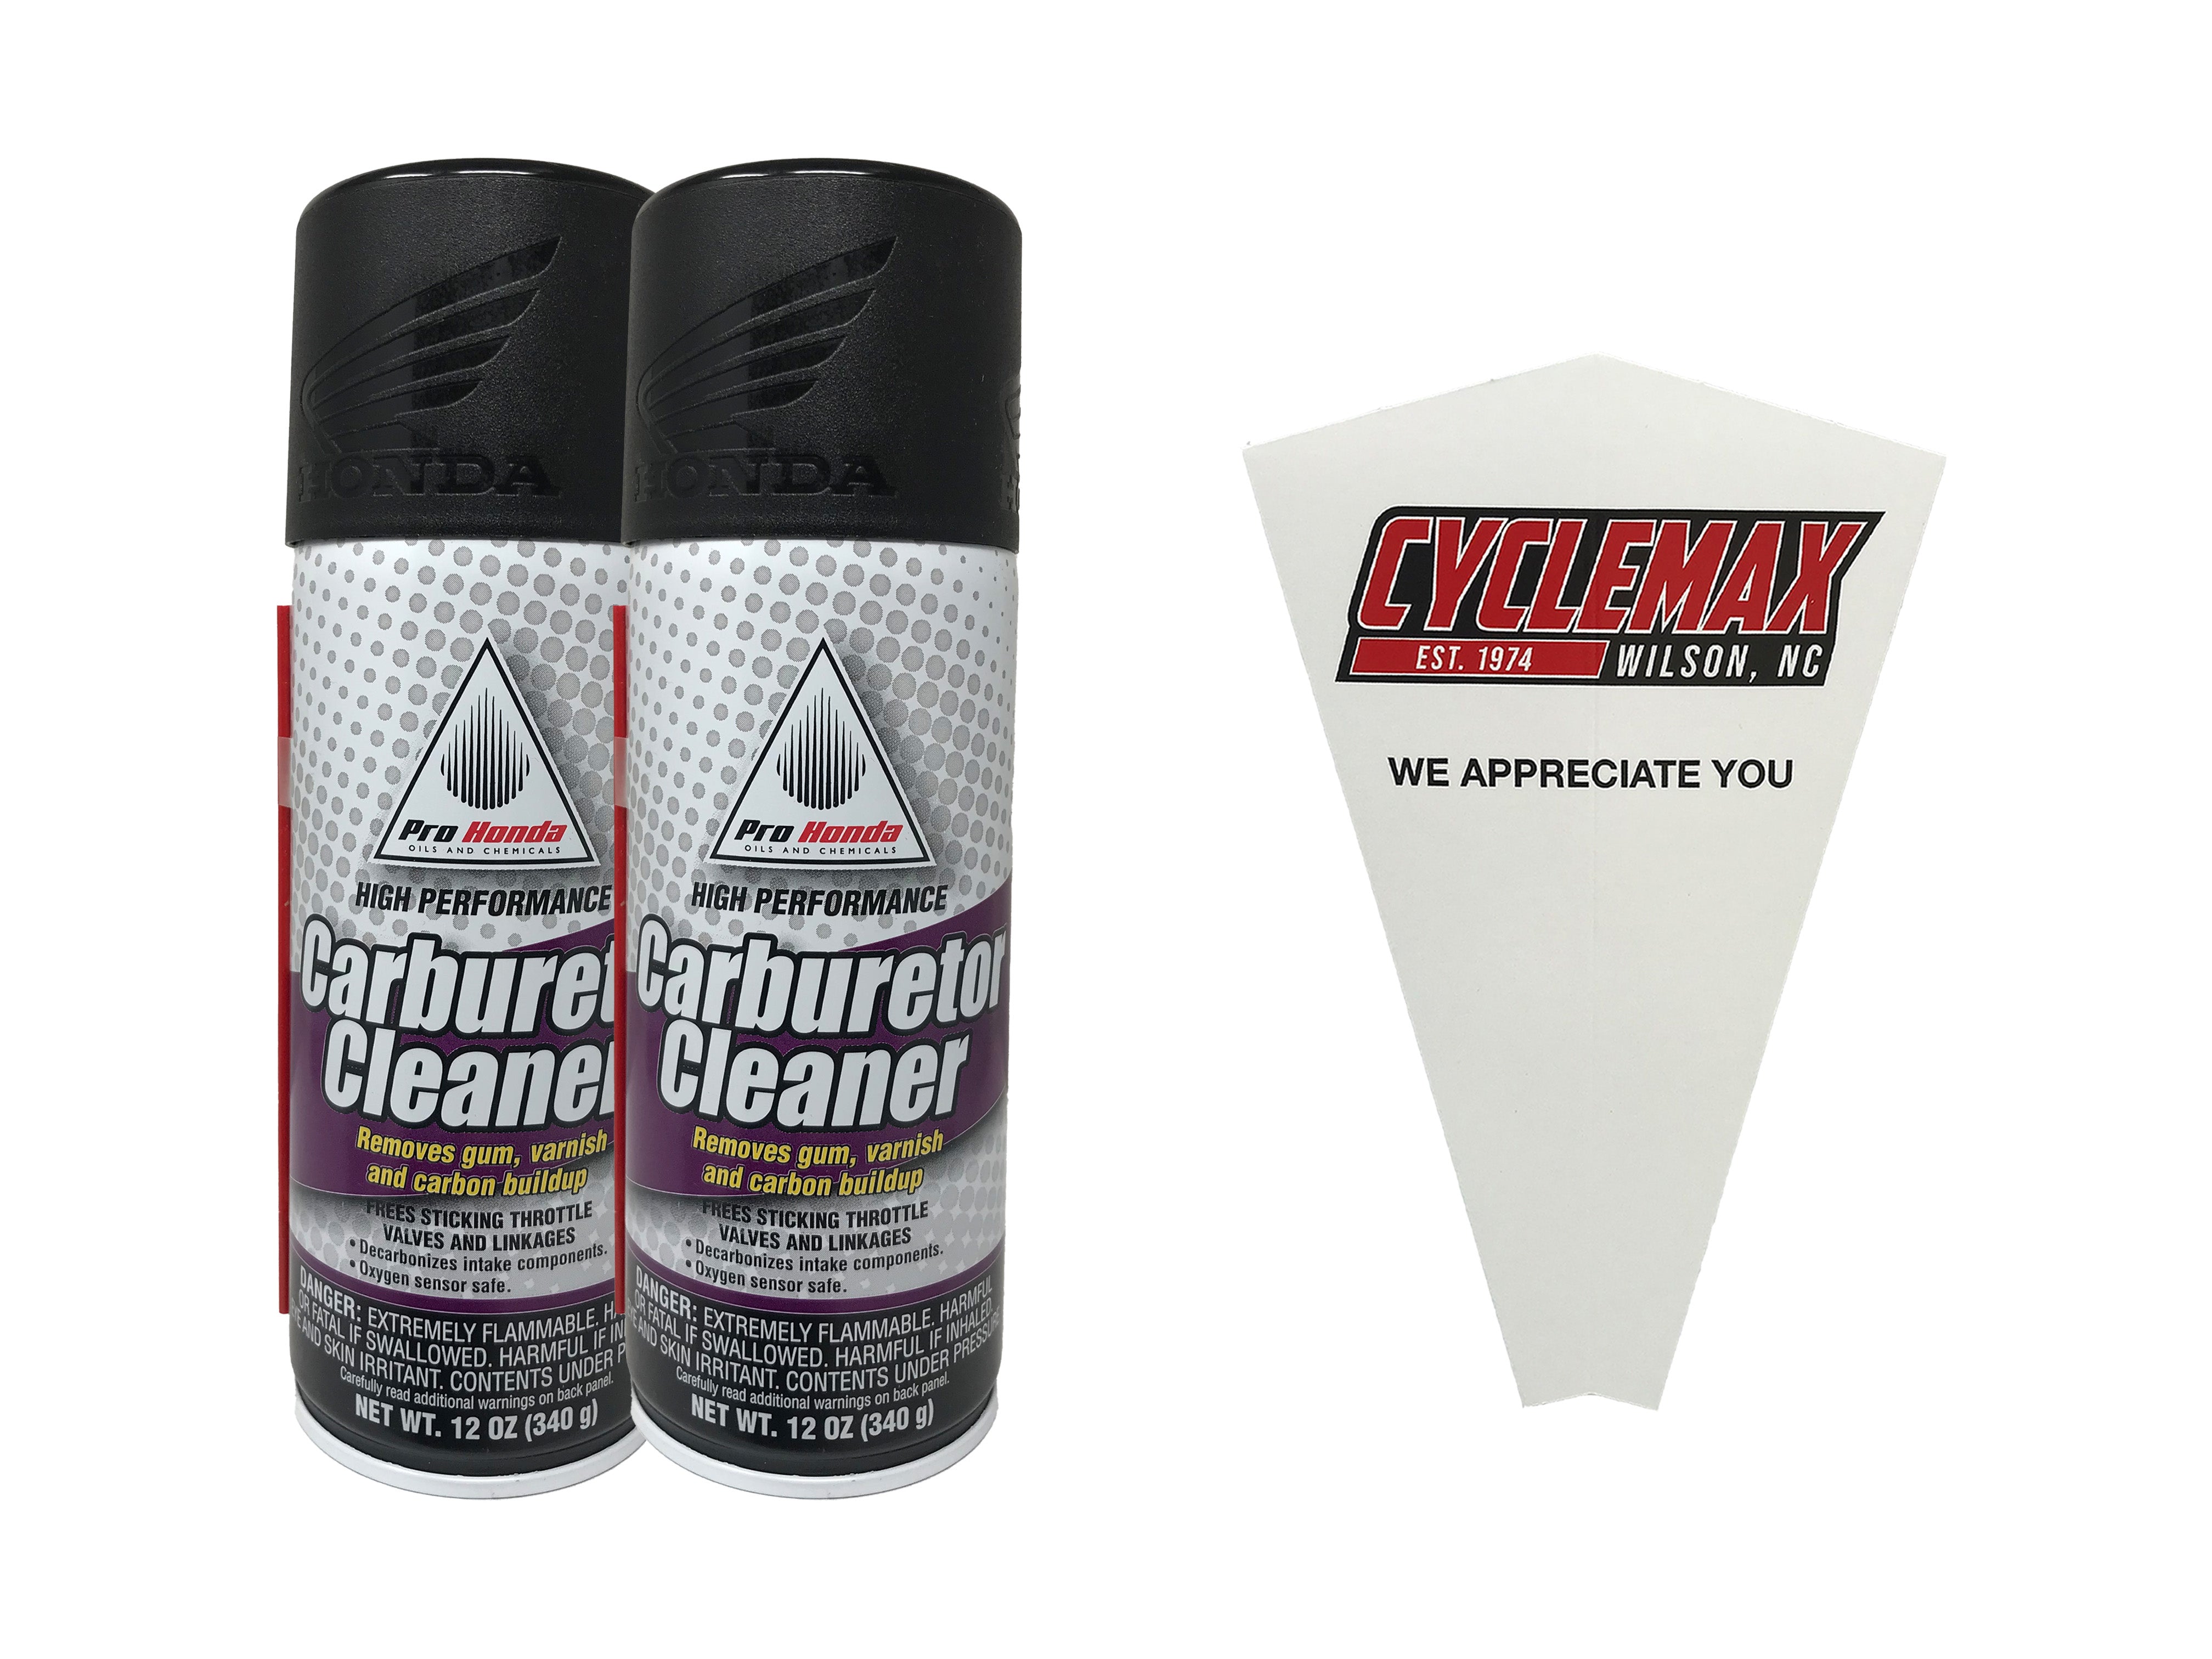 Cyclemax Two Pack for Honda High Performance Carburetor Cleaner 08732-CC000 Contains Two 12oz Cans and a Funnel